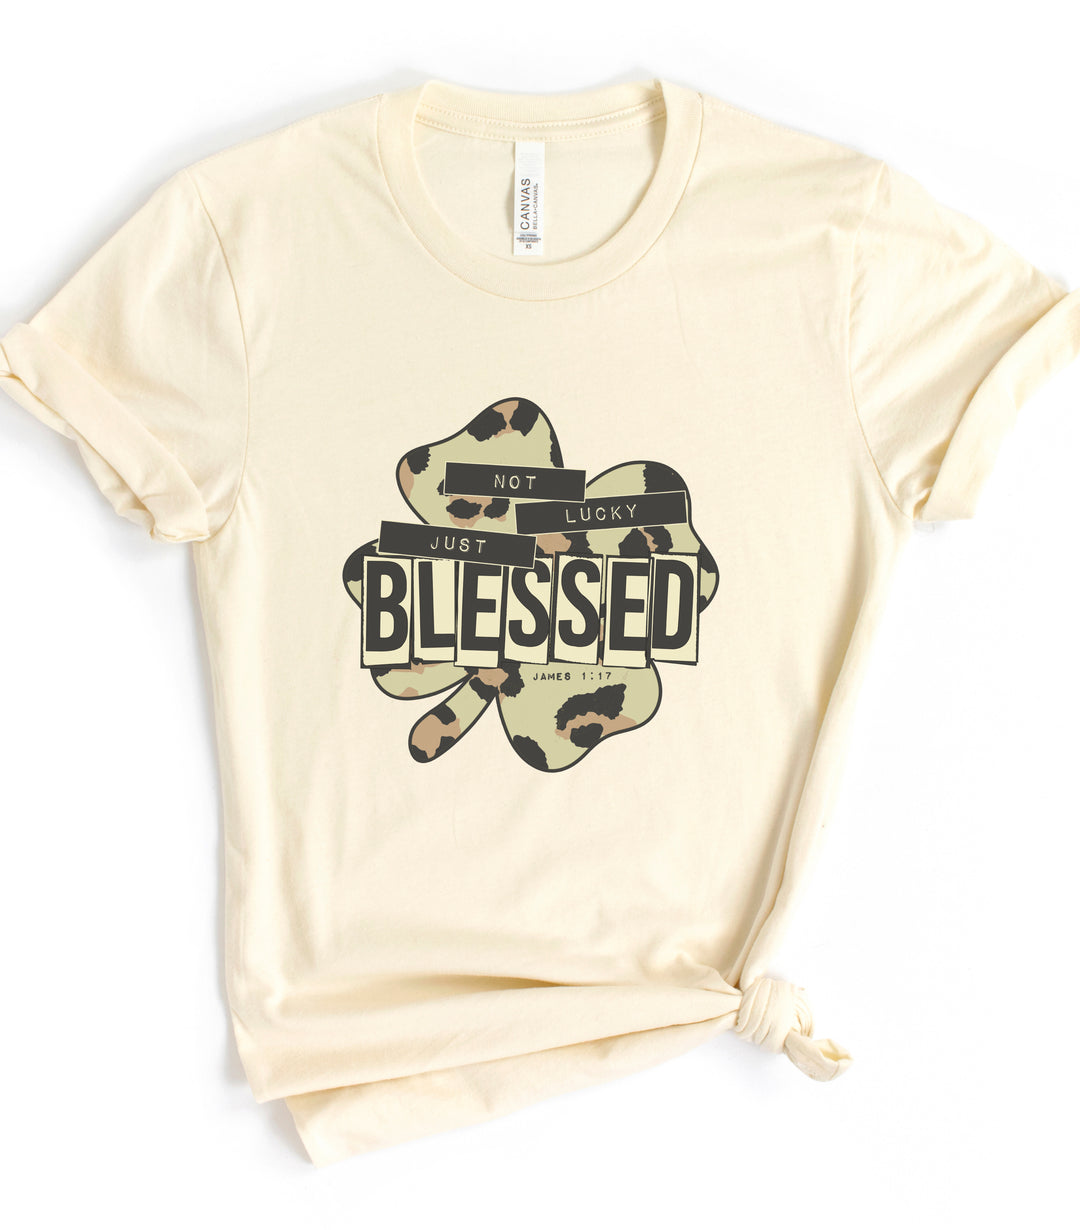 Not Lucky, Just Blessed James 1:17 - Unisex Crew-Neck Tee